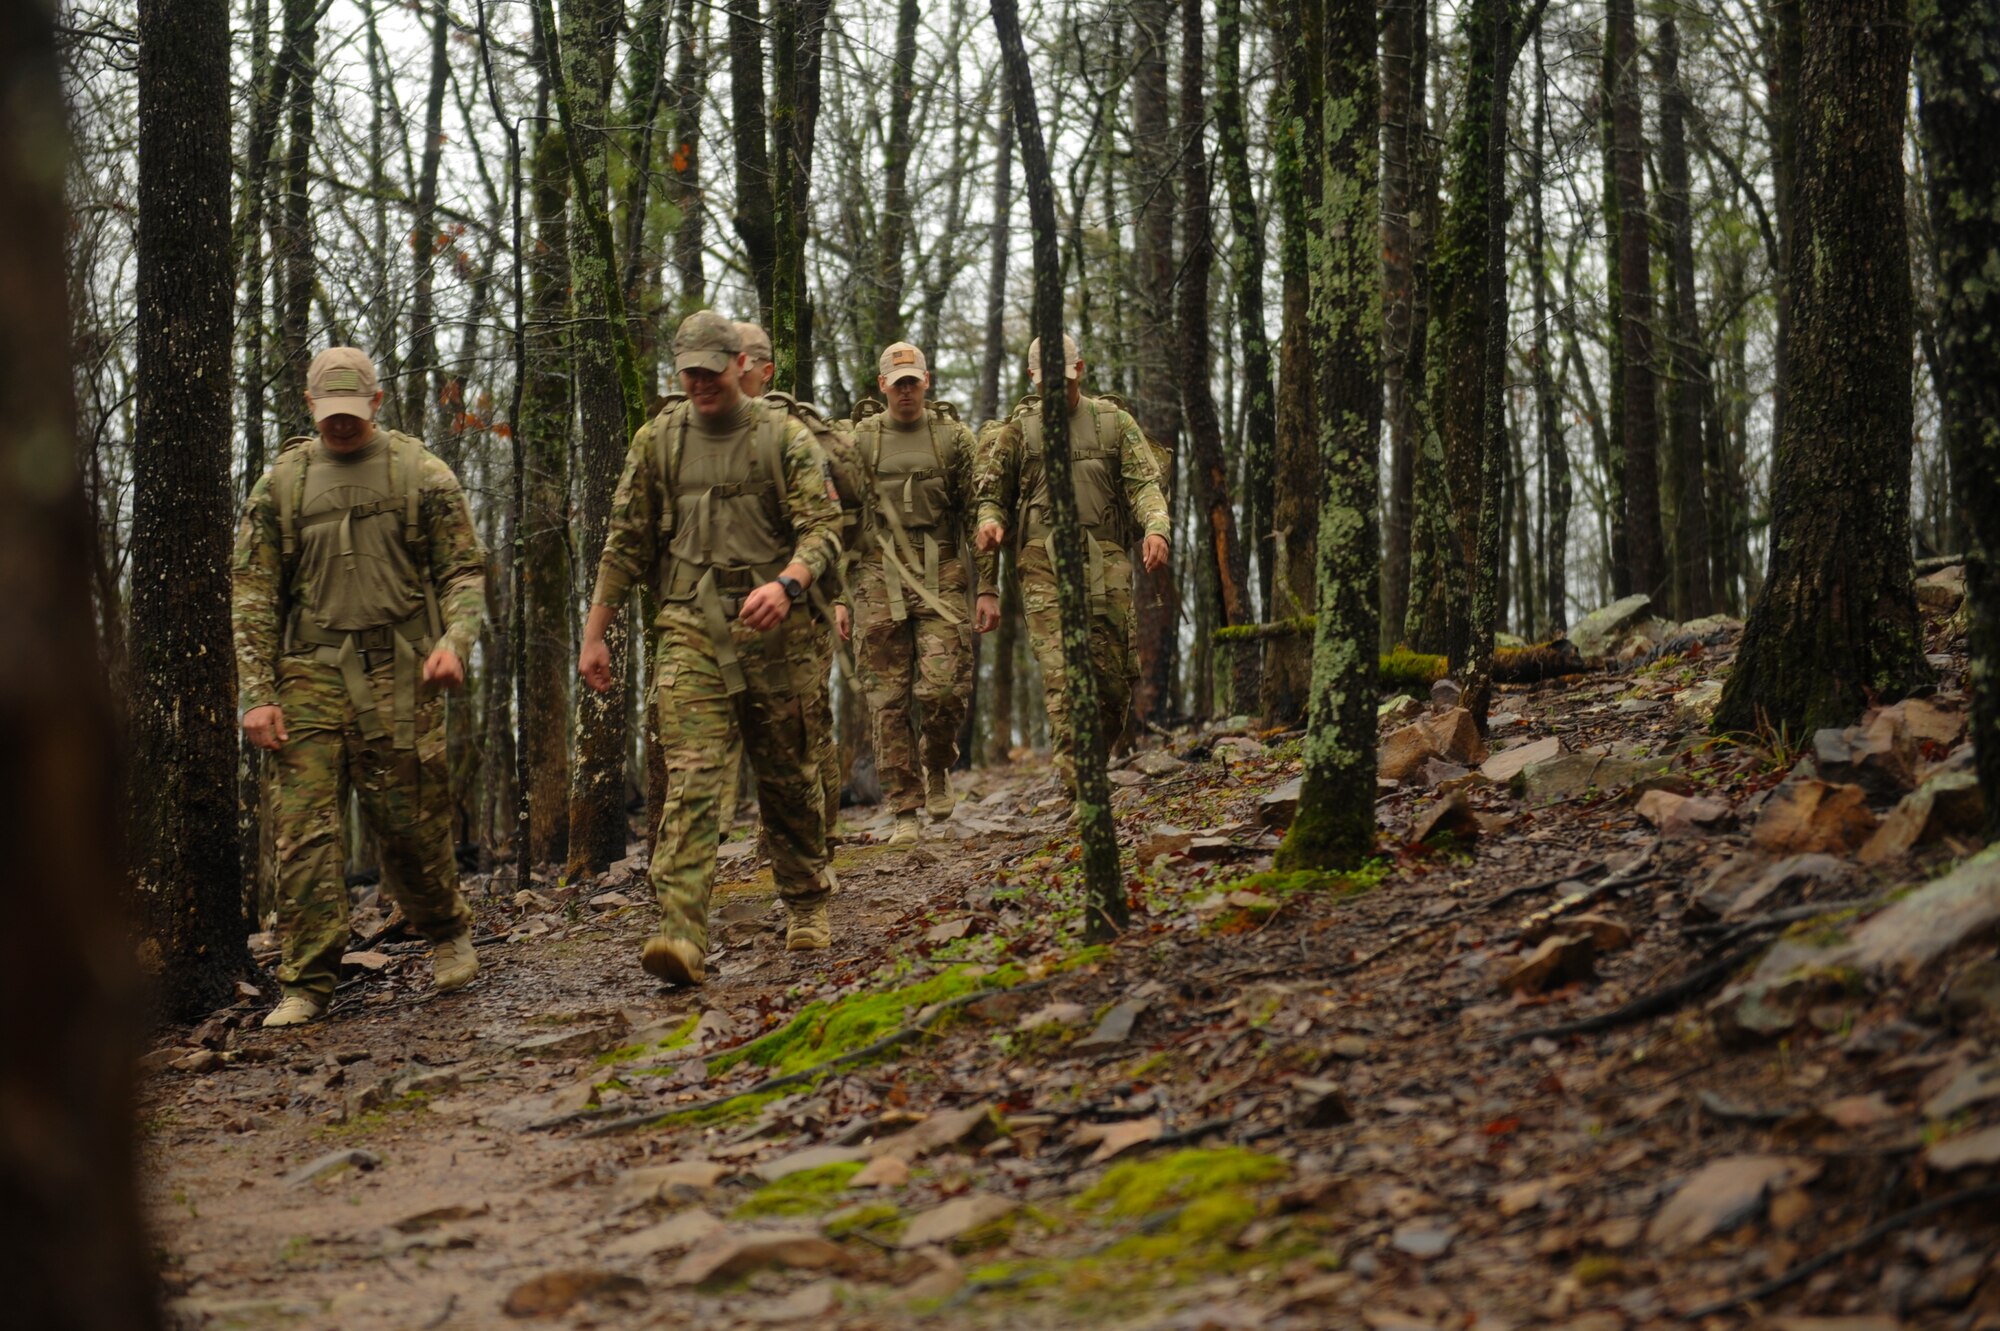 U.S. Airmen from the 19th Logistics Readiness Squadron traverse through terrain March 11, 2016, at Burns Park in North Little Rock, Ark. The team is training for the Bataan Memorial Death March, at White Sands Missile Range, N.M.; which consists of 26.2 miles of desert terrain including two miles through sand. (U.S. Air Force photo/Senior Airman Harry Brexel)